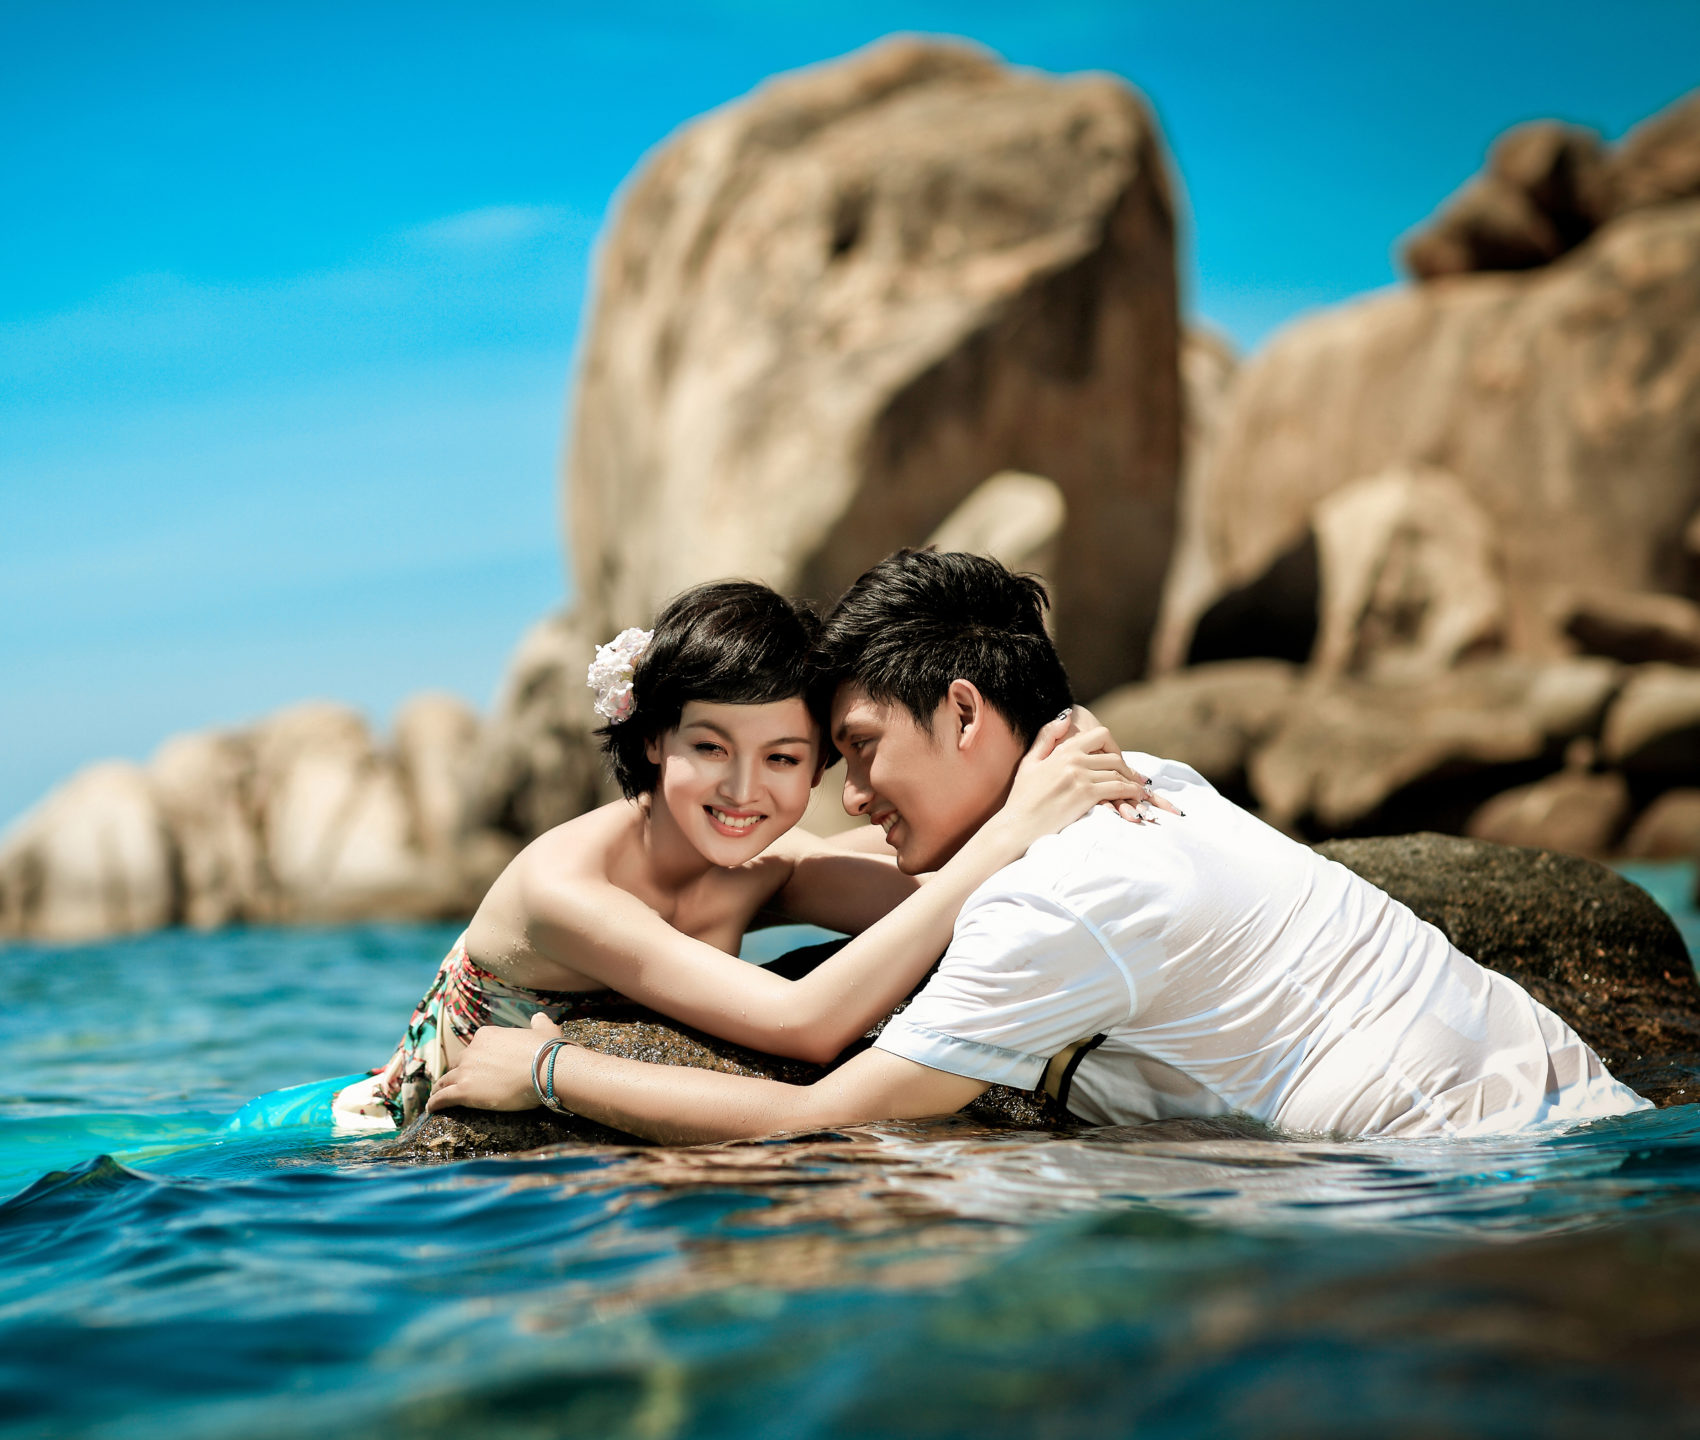 Beach Pre wedding shoot tips - PixelWorks Photography